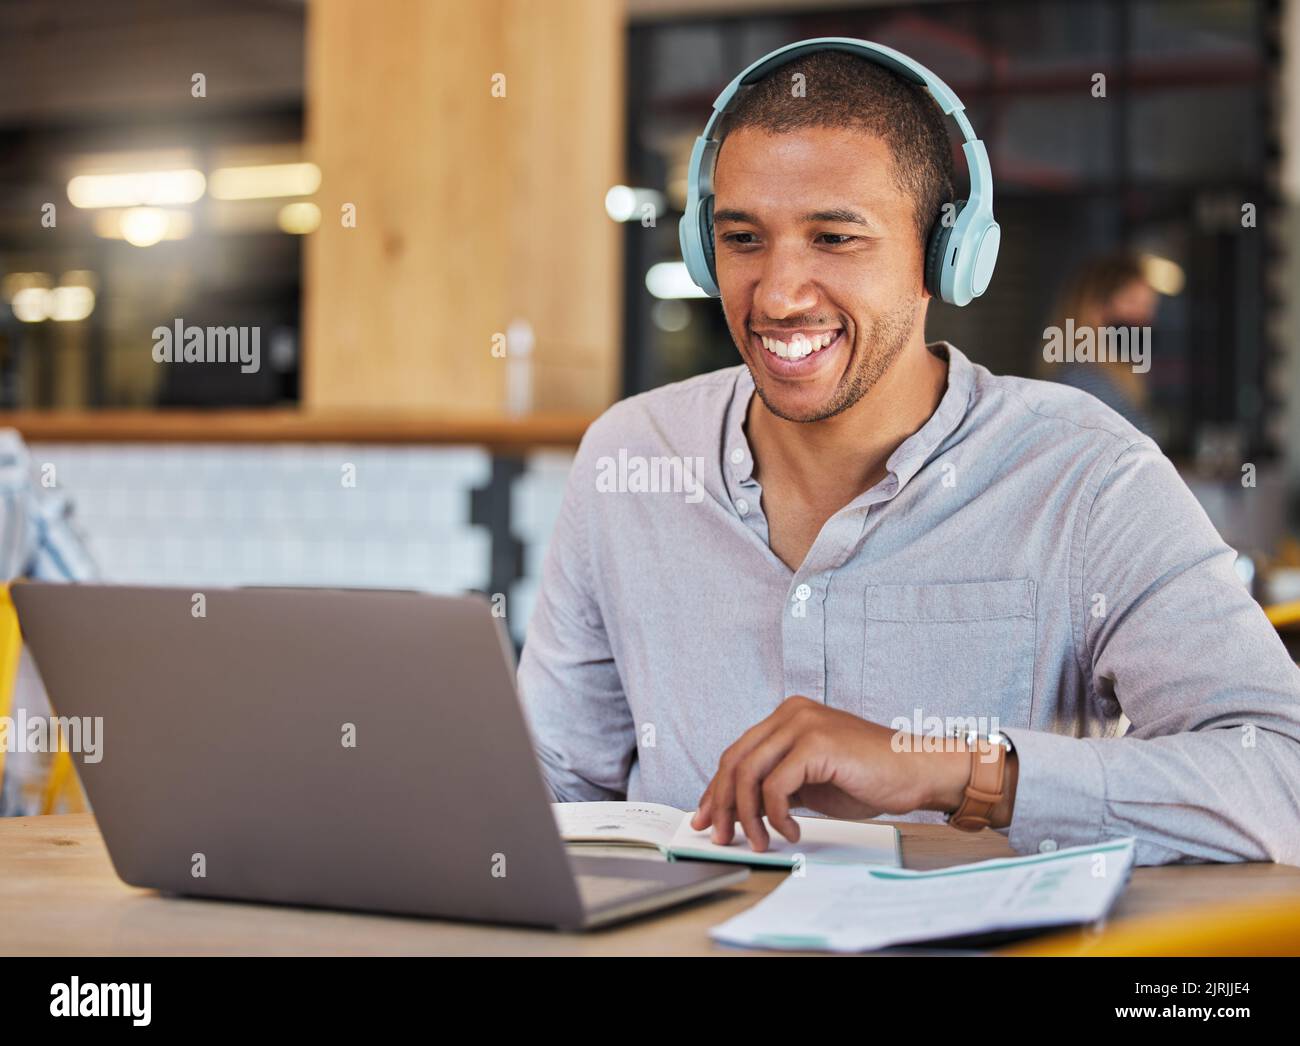 Laptop webinar, workshop training or zoom call meeting in cafe, restaurant or coffee shop with paper. Learning student or headphones man listening to Stock Photo